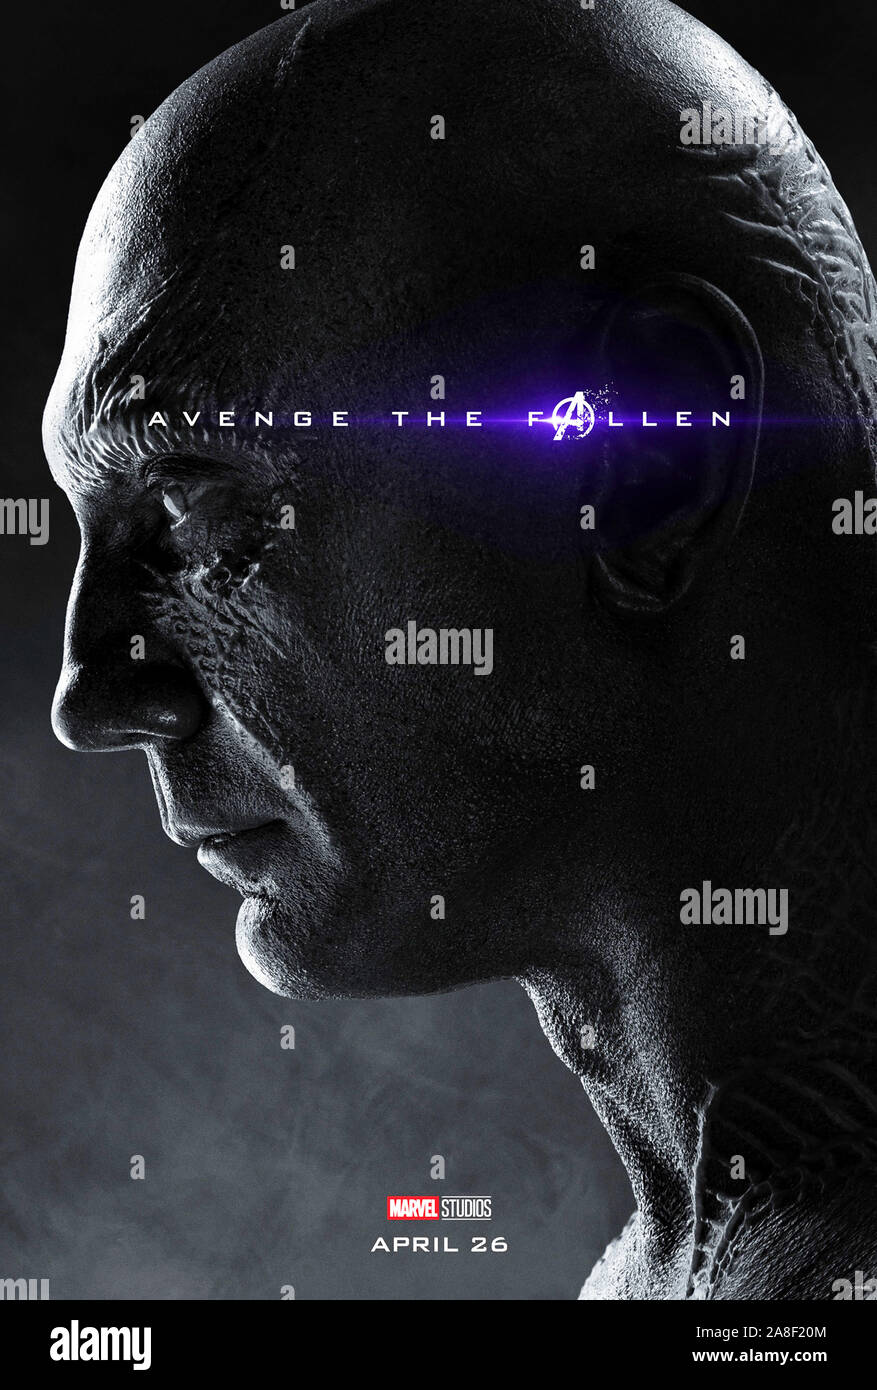 USA. Dave Bautista  in the ©Walt Disney Studios new movie: Avengers: Endgame (2019) .  Plot:After the devastating events of Avengers: Infinity War (2018), the universe is in ruins. With the help of remaining allies, the Avengers assemble once more in order to undo Thanos' actions and restore order to the universe. Ref: LMK106-J4714-100419 Supplied by LMKMEDIA. Editorial Only. Landmark Media is not the copyright owner of these Film or TV stills but provides a service only for recognised Media outlets. pictures@lmkmedia.com Stock Photo